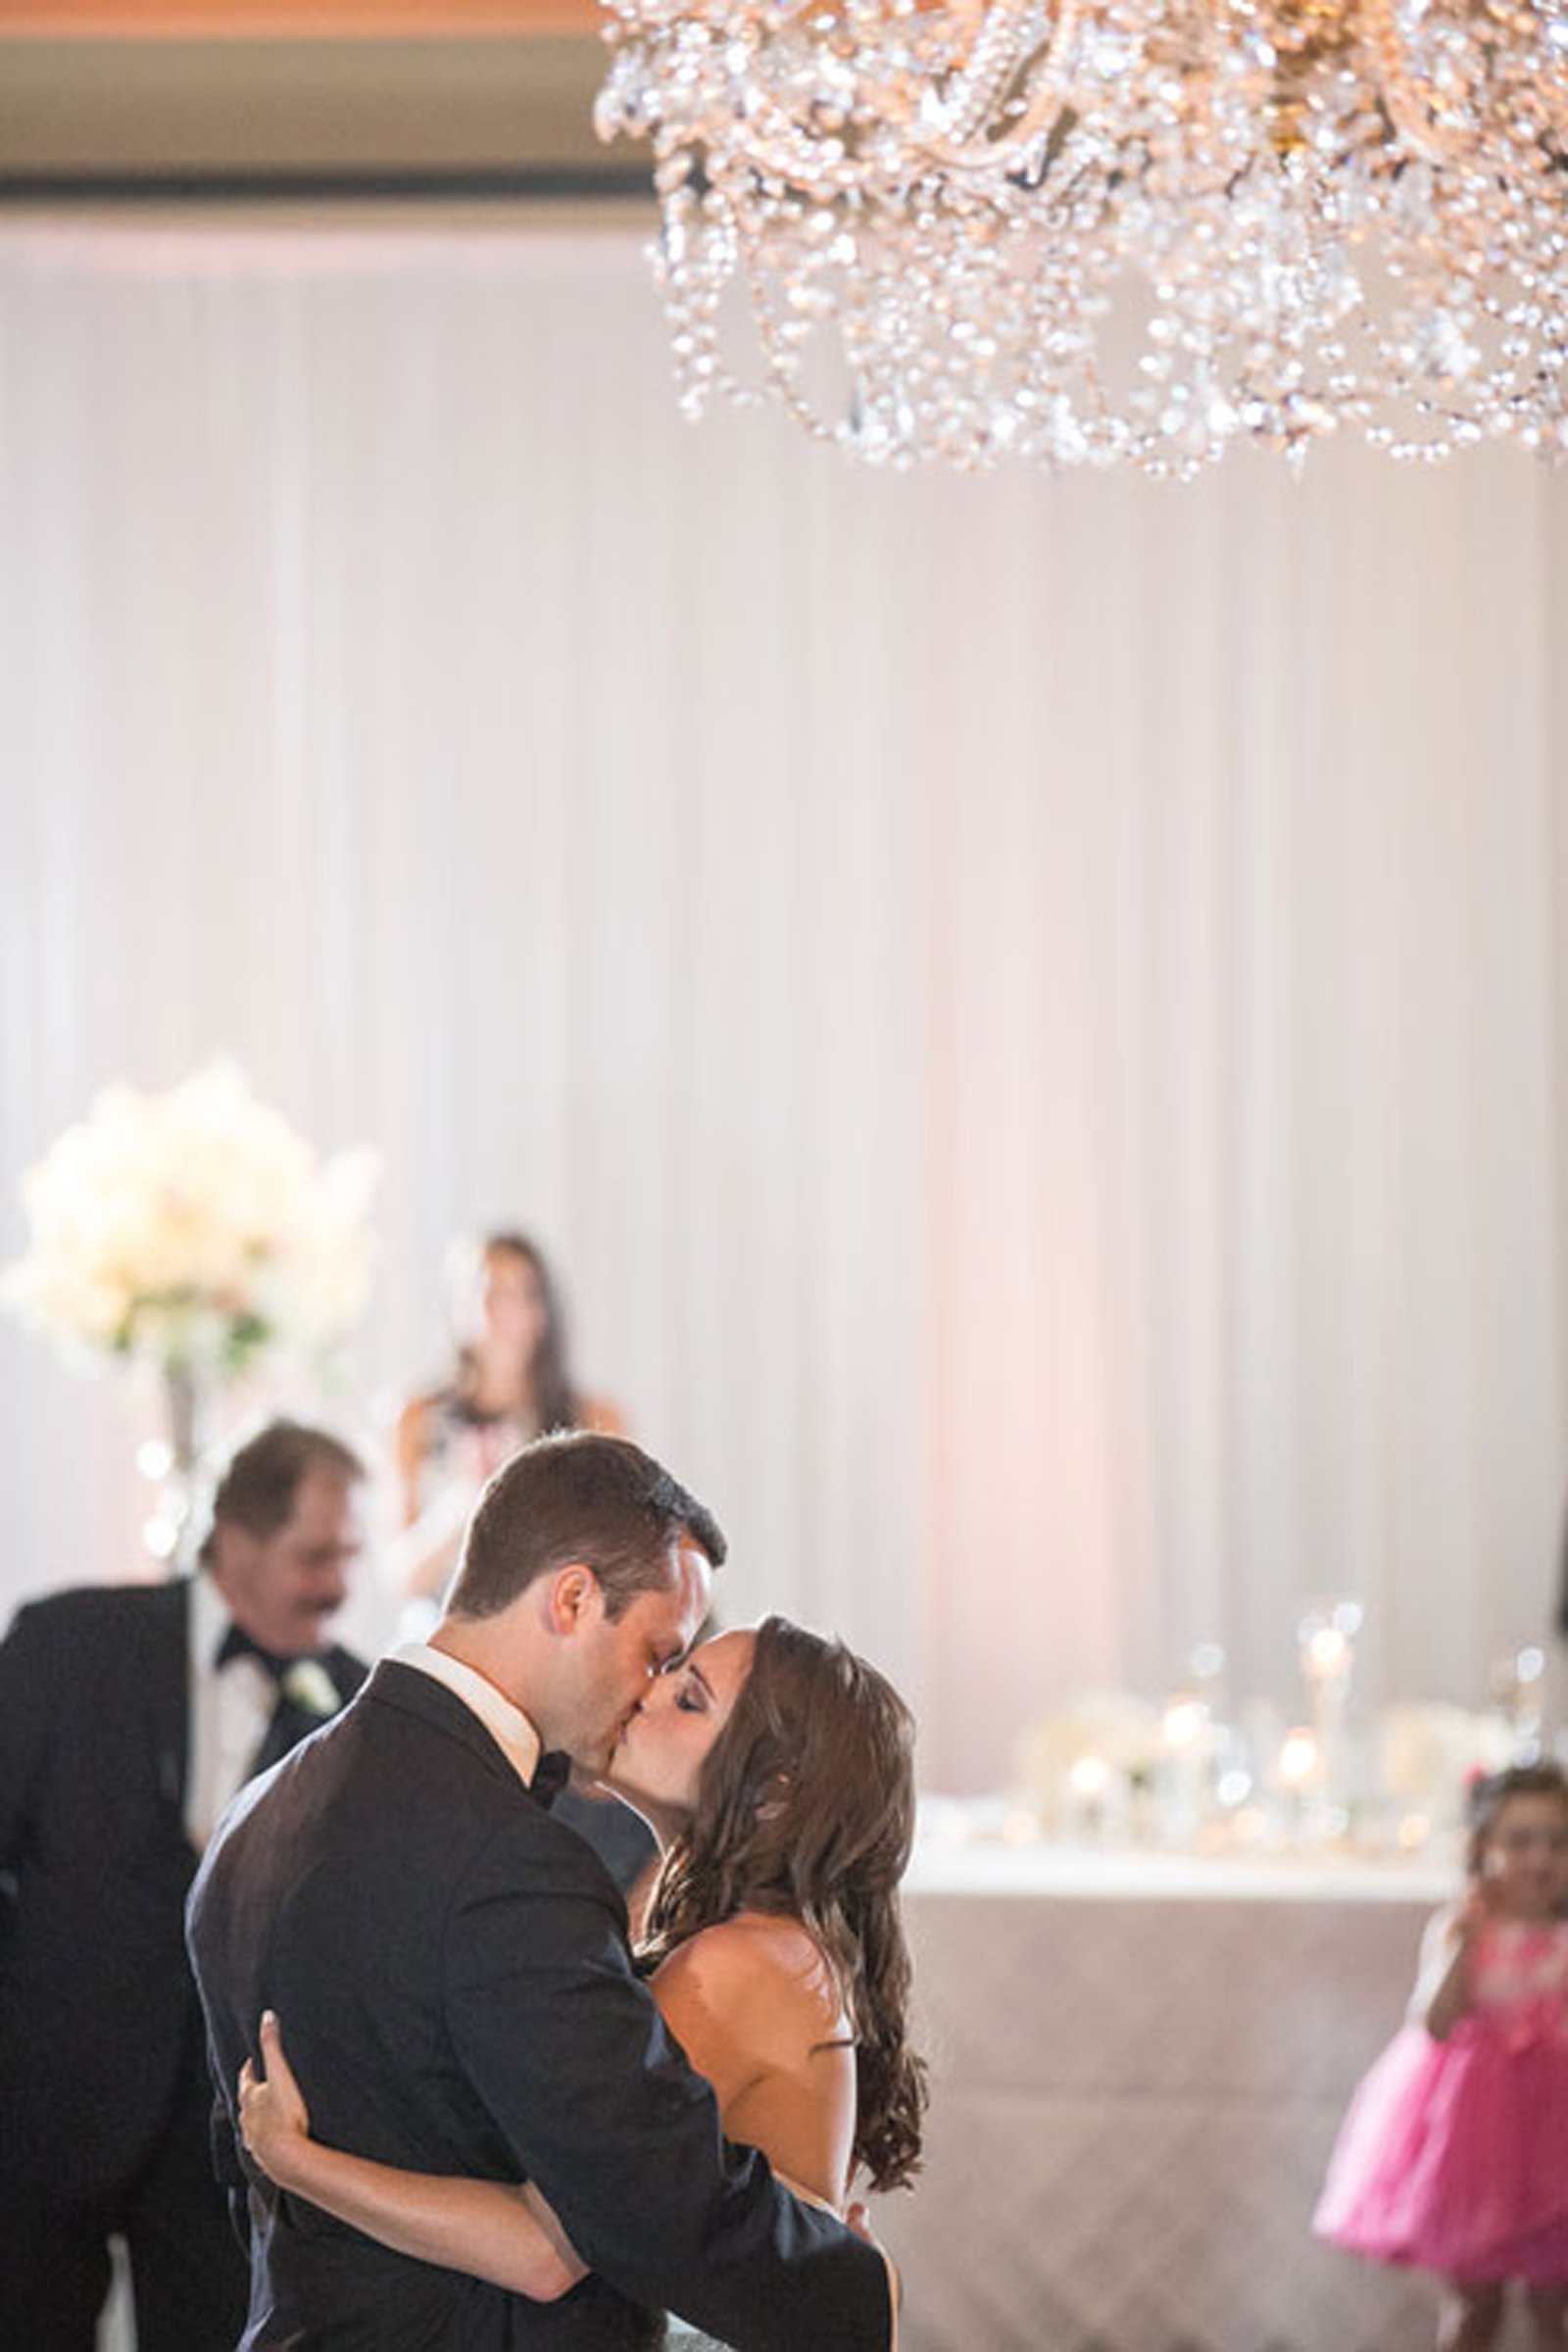 Wedding at Gillespie Conference Center. Photographed by Jennifer Mayo Photography, Wedding Planning by Celebrated Events